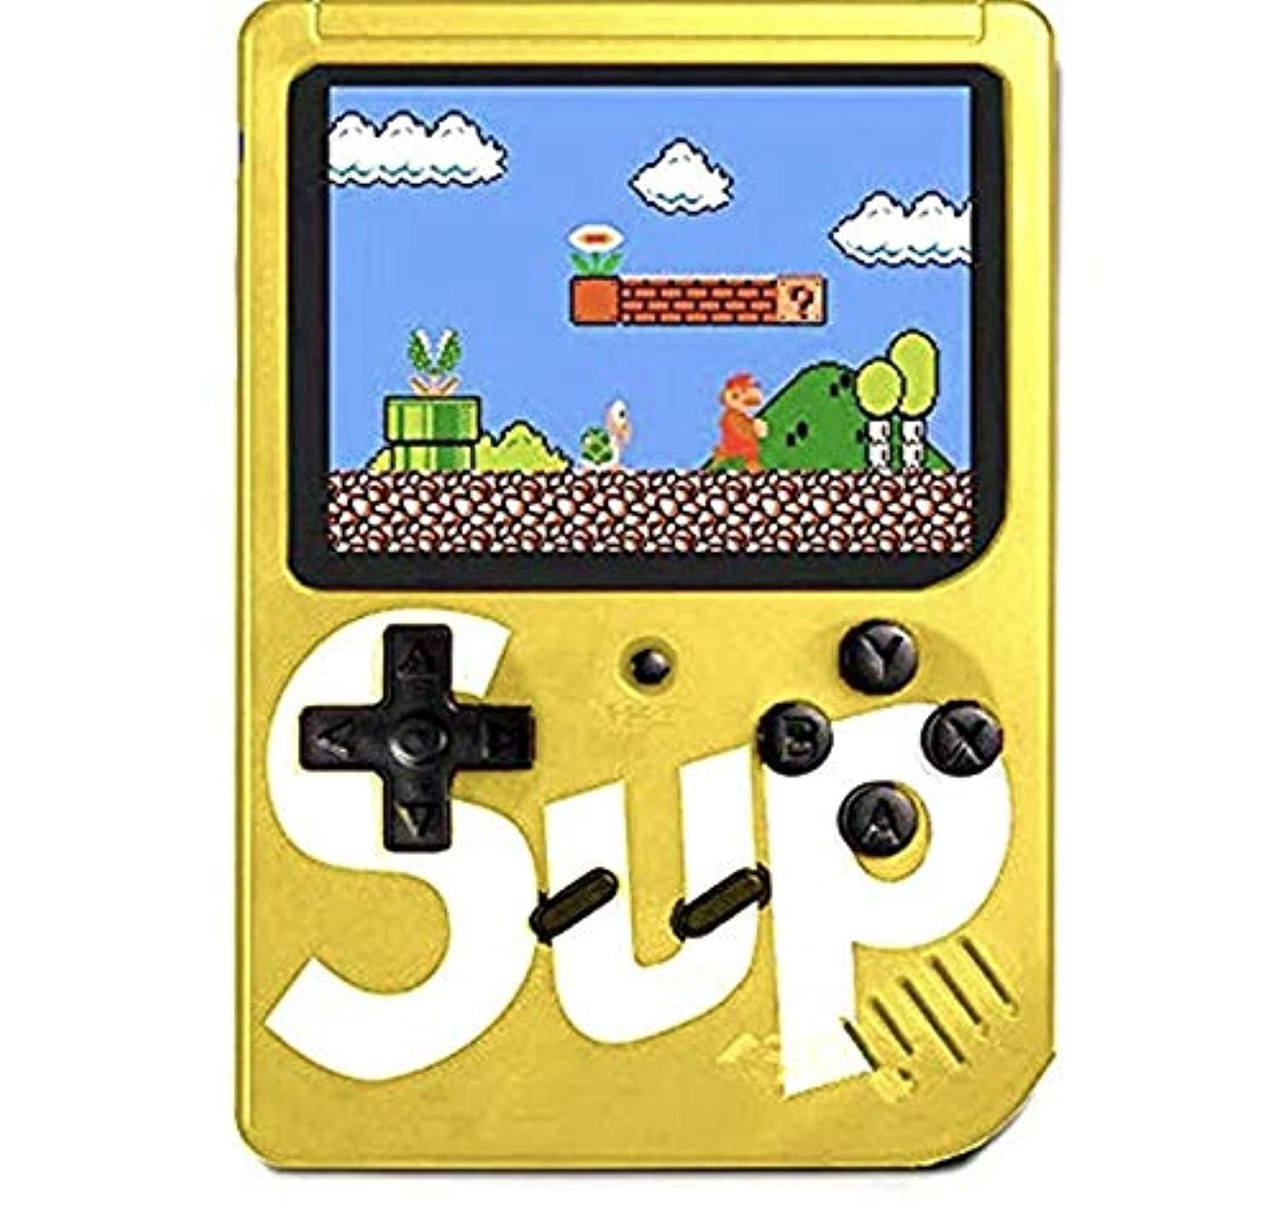 SUP Game Box Plus 400 in 1 Retro Games UPGRADED VERSION mini Portable  Console Handheld Gift By PRIME TECH ™ (Yellow)